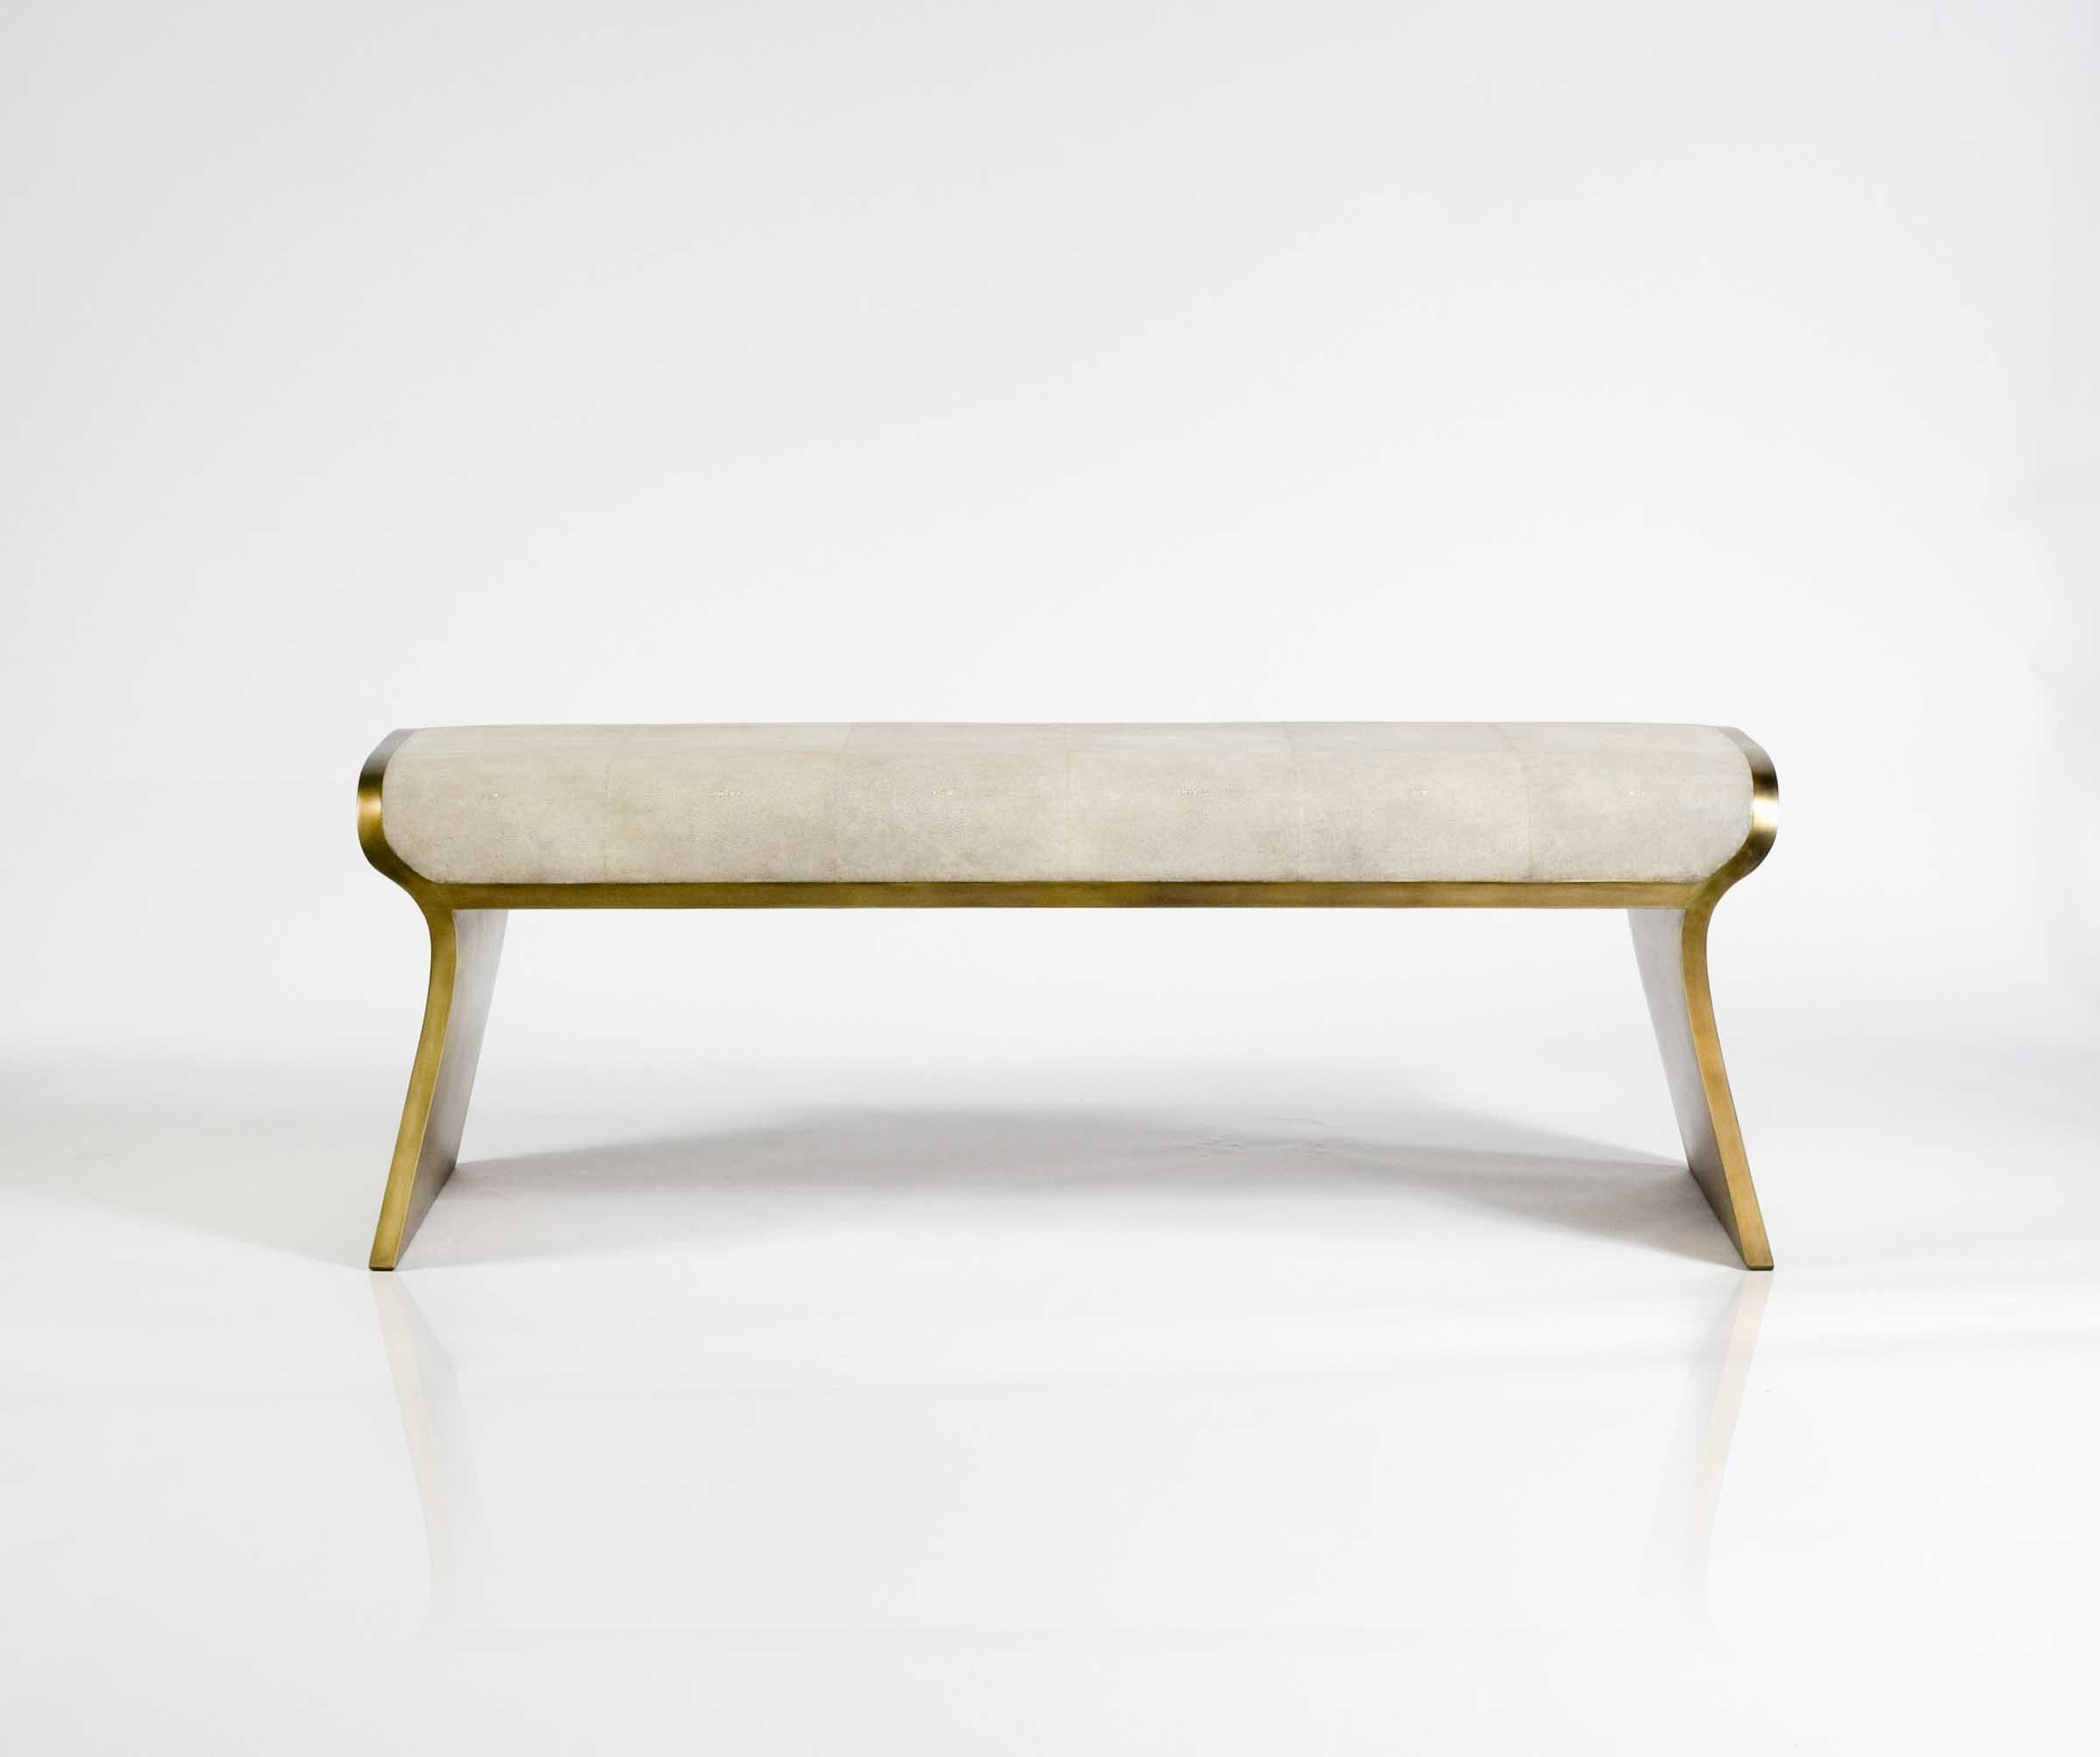 Hand-Crafted Dandy Day Bench in Coal Black Shagreen and Bronze-Patina Brass by Kifu Paris For Sale